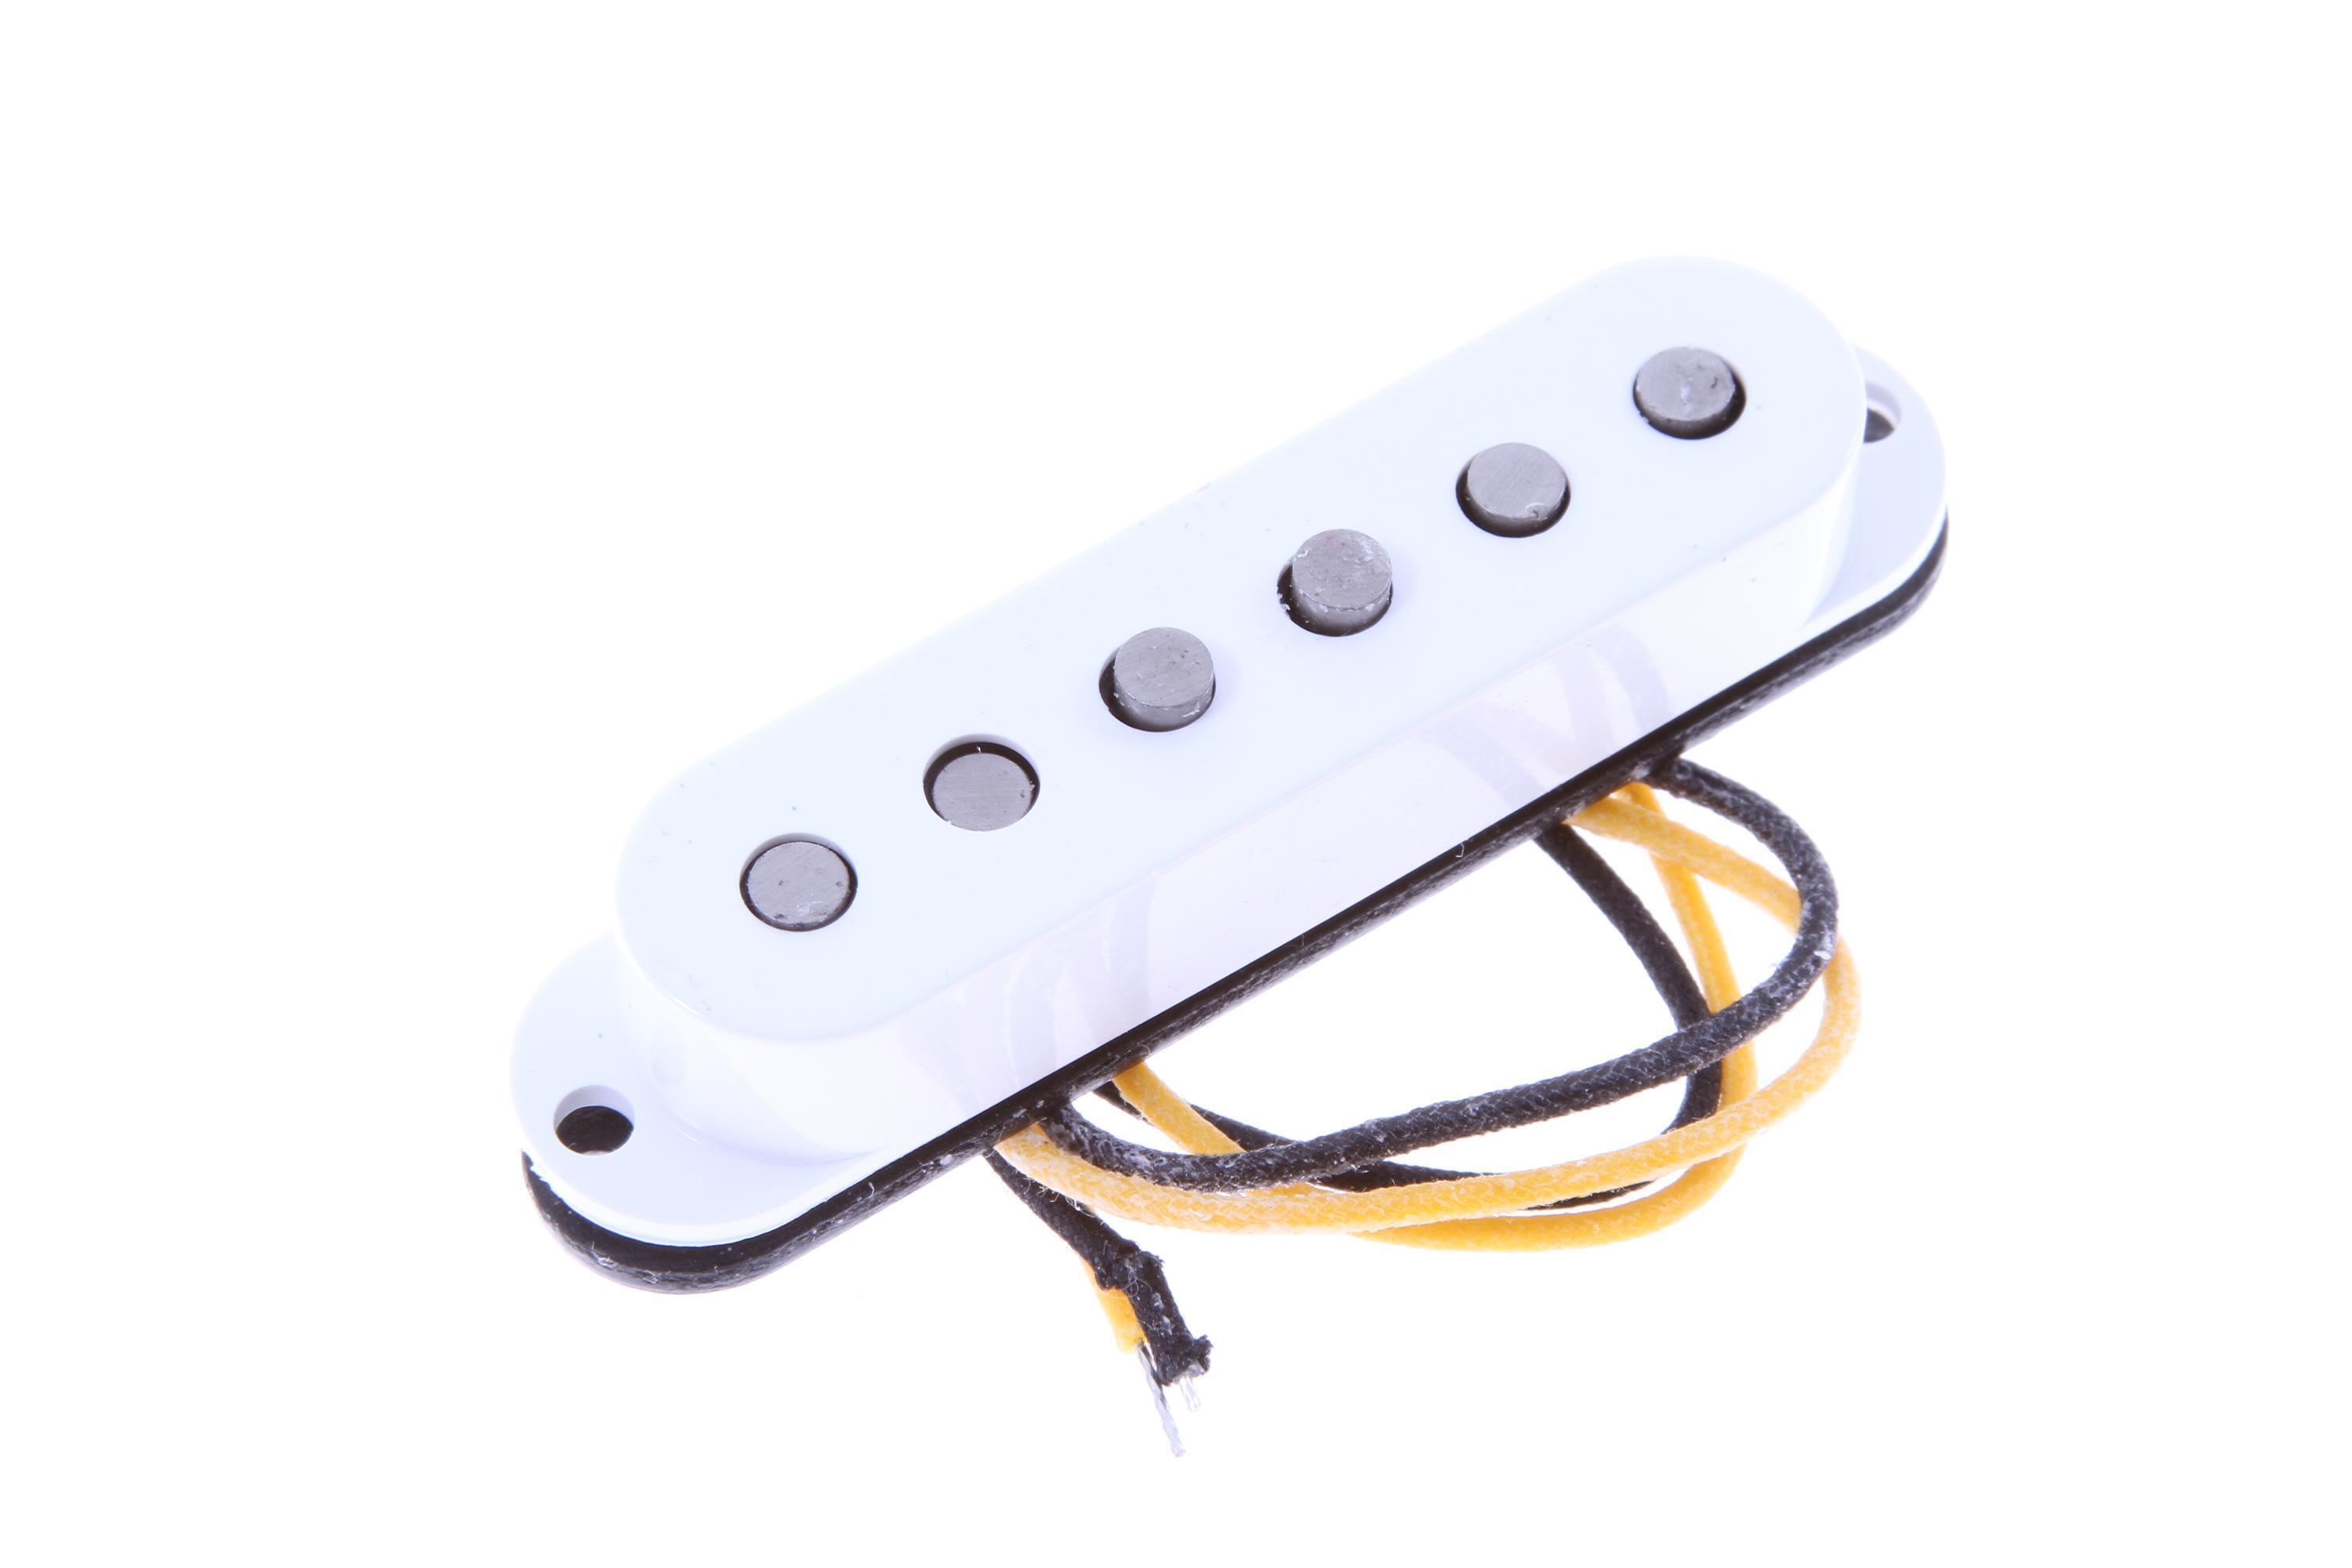 Fender Custom Shop Texas Special Strat Pickup - Neck | Sweetwater